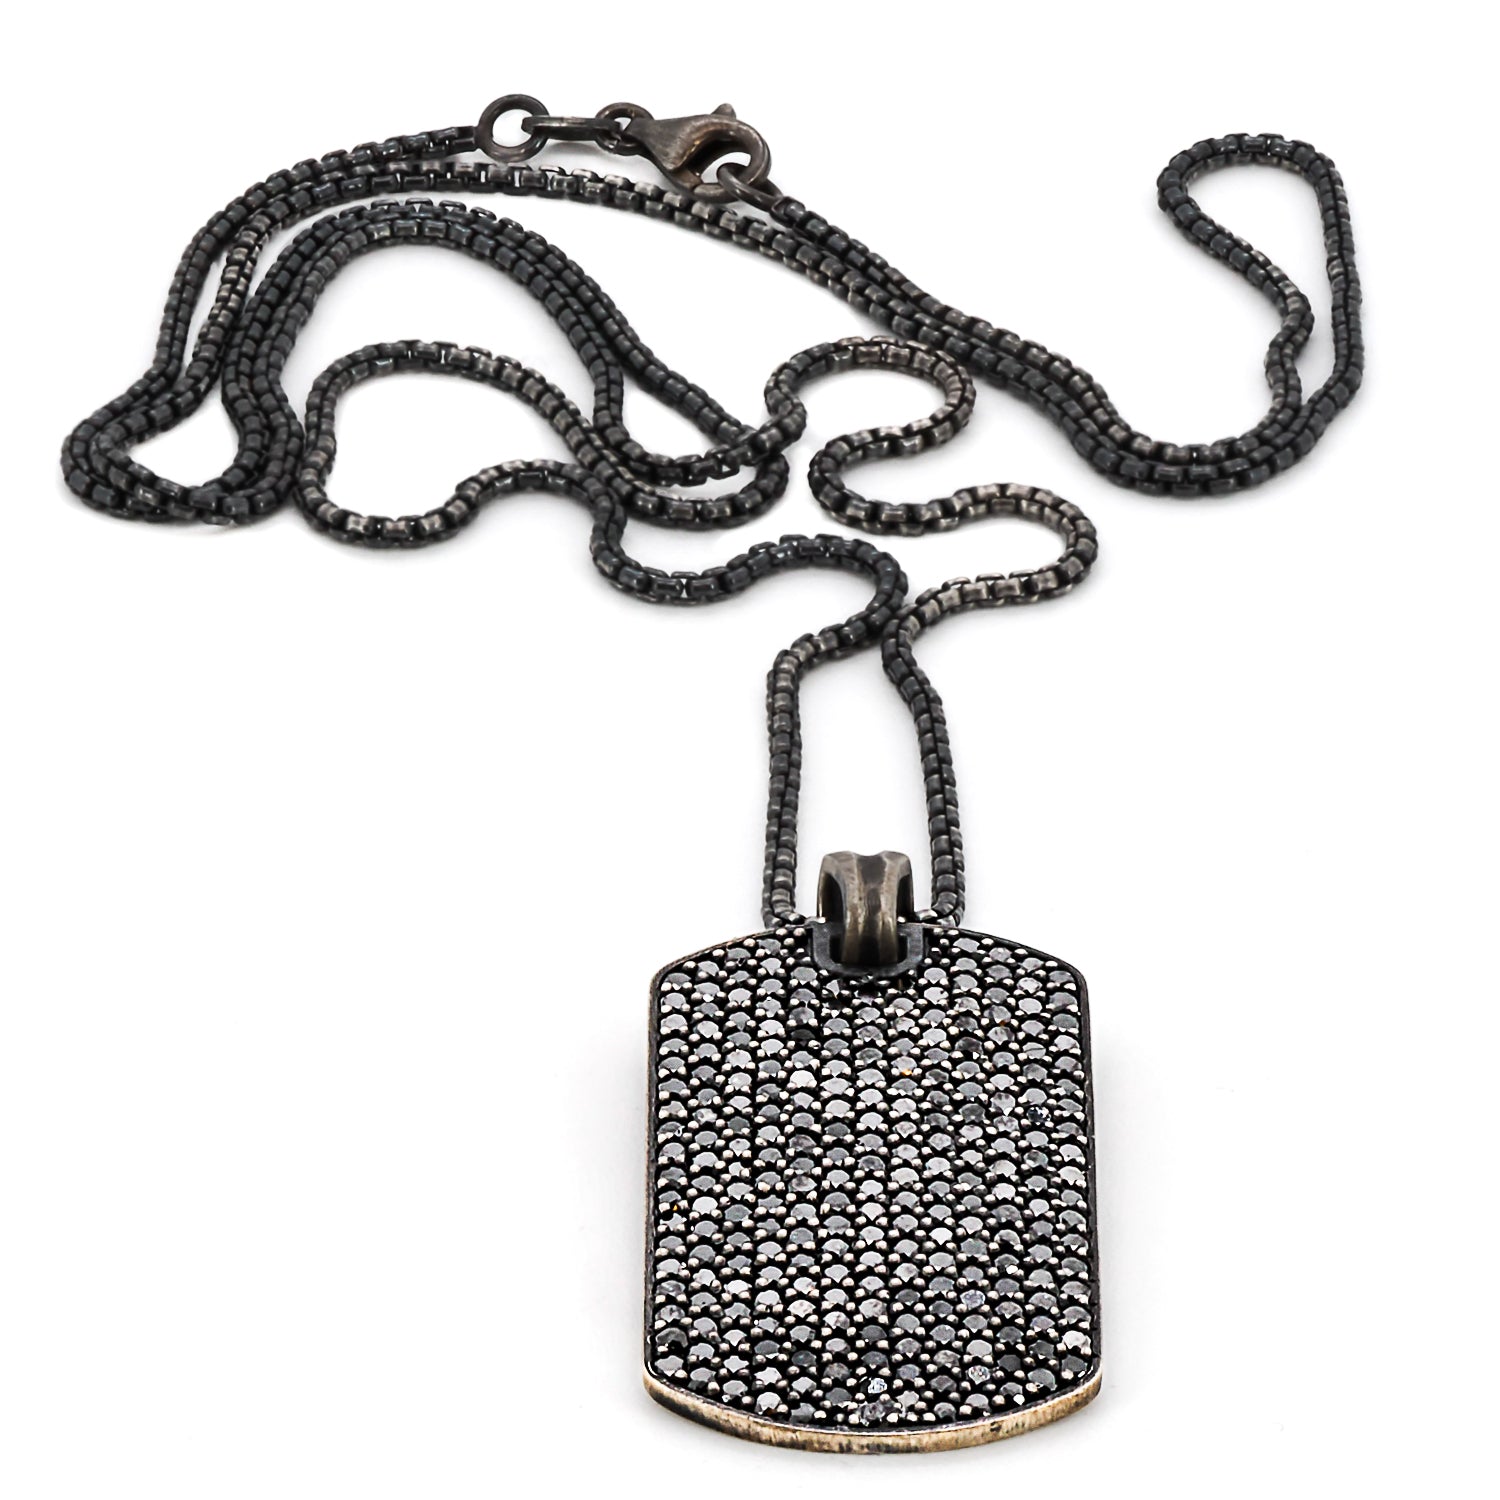 Top view of the stunning Dog Tag Black Diamond Necklace, highlighting the pendant&#39;s unique design and craftsmanship.